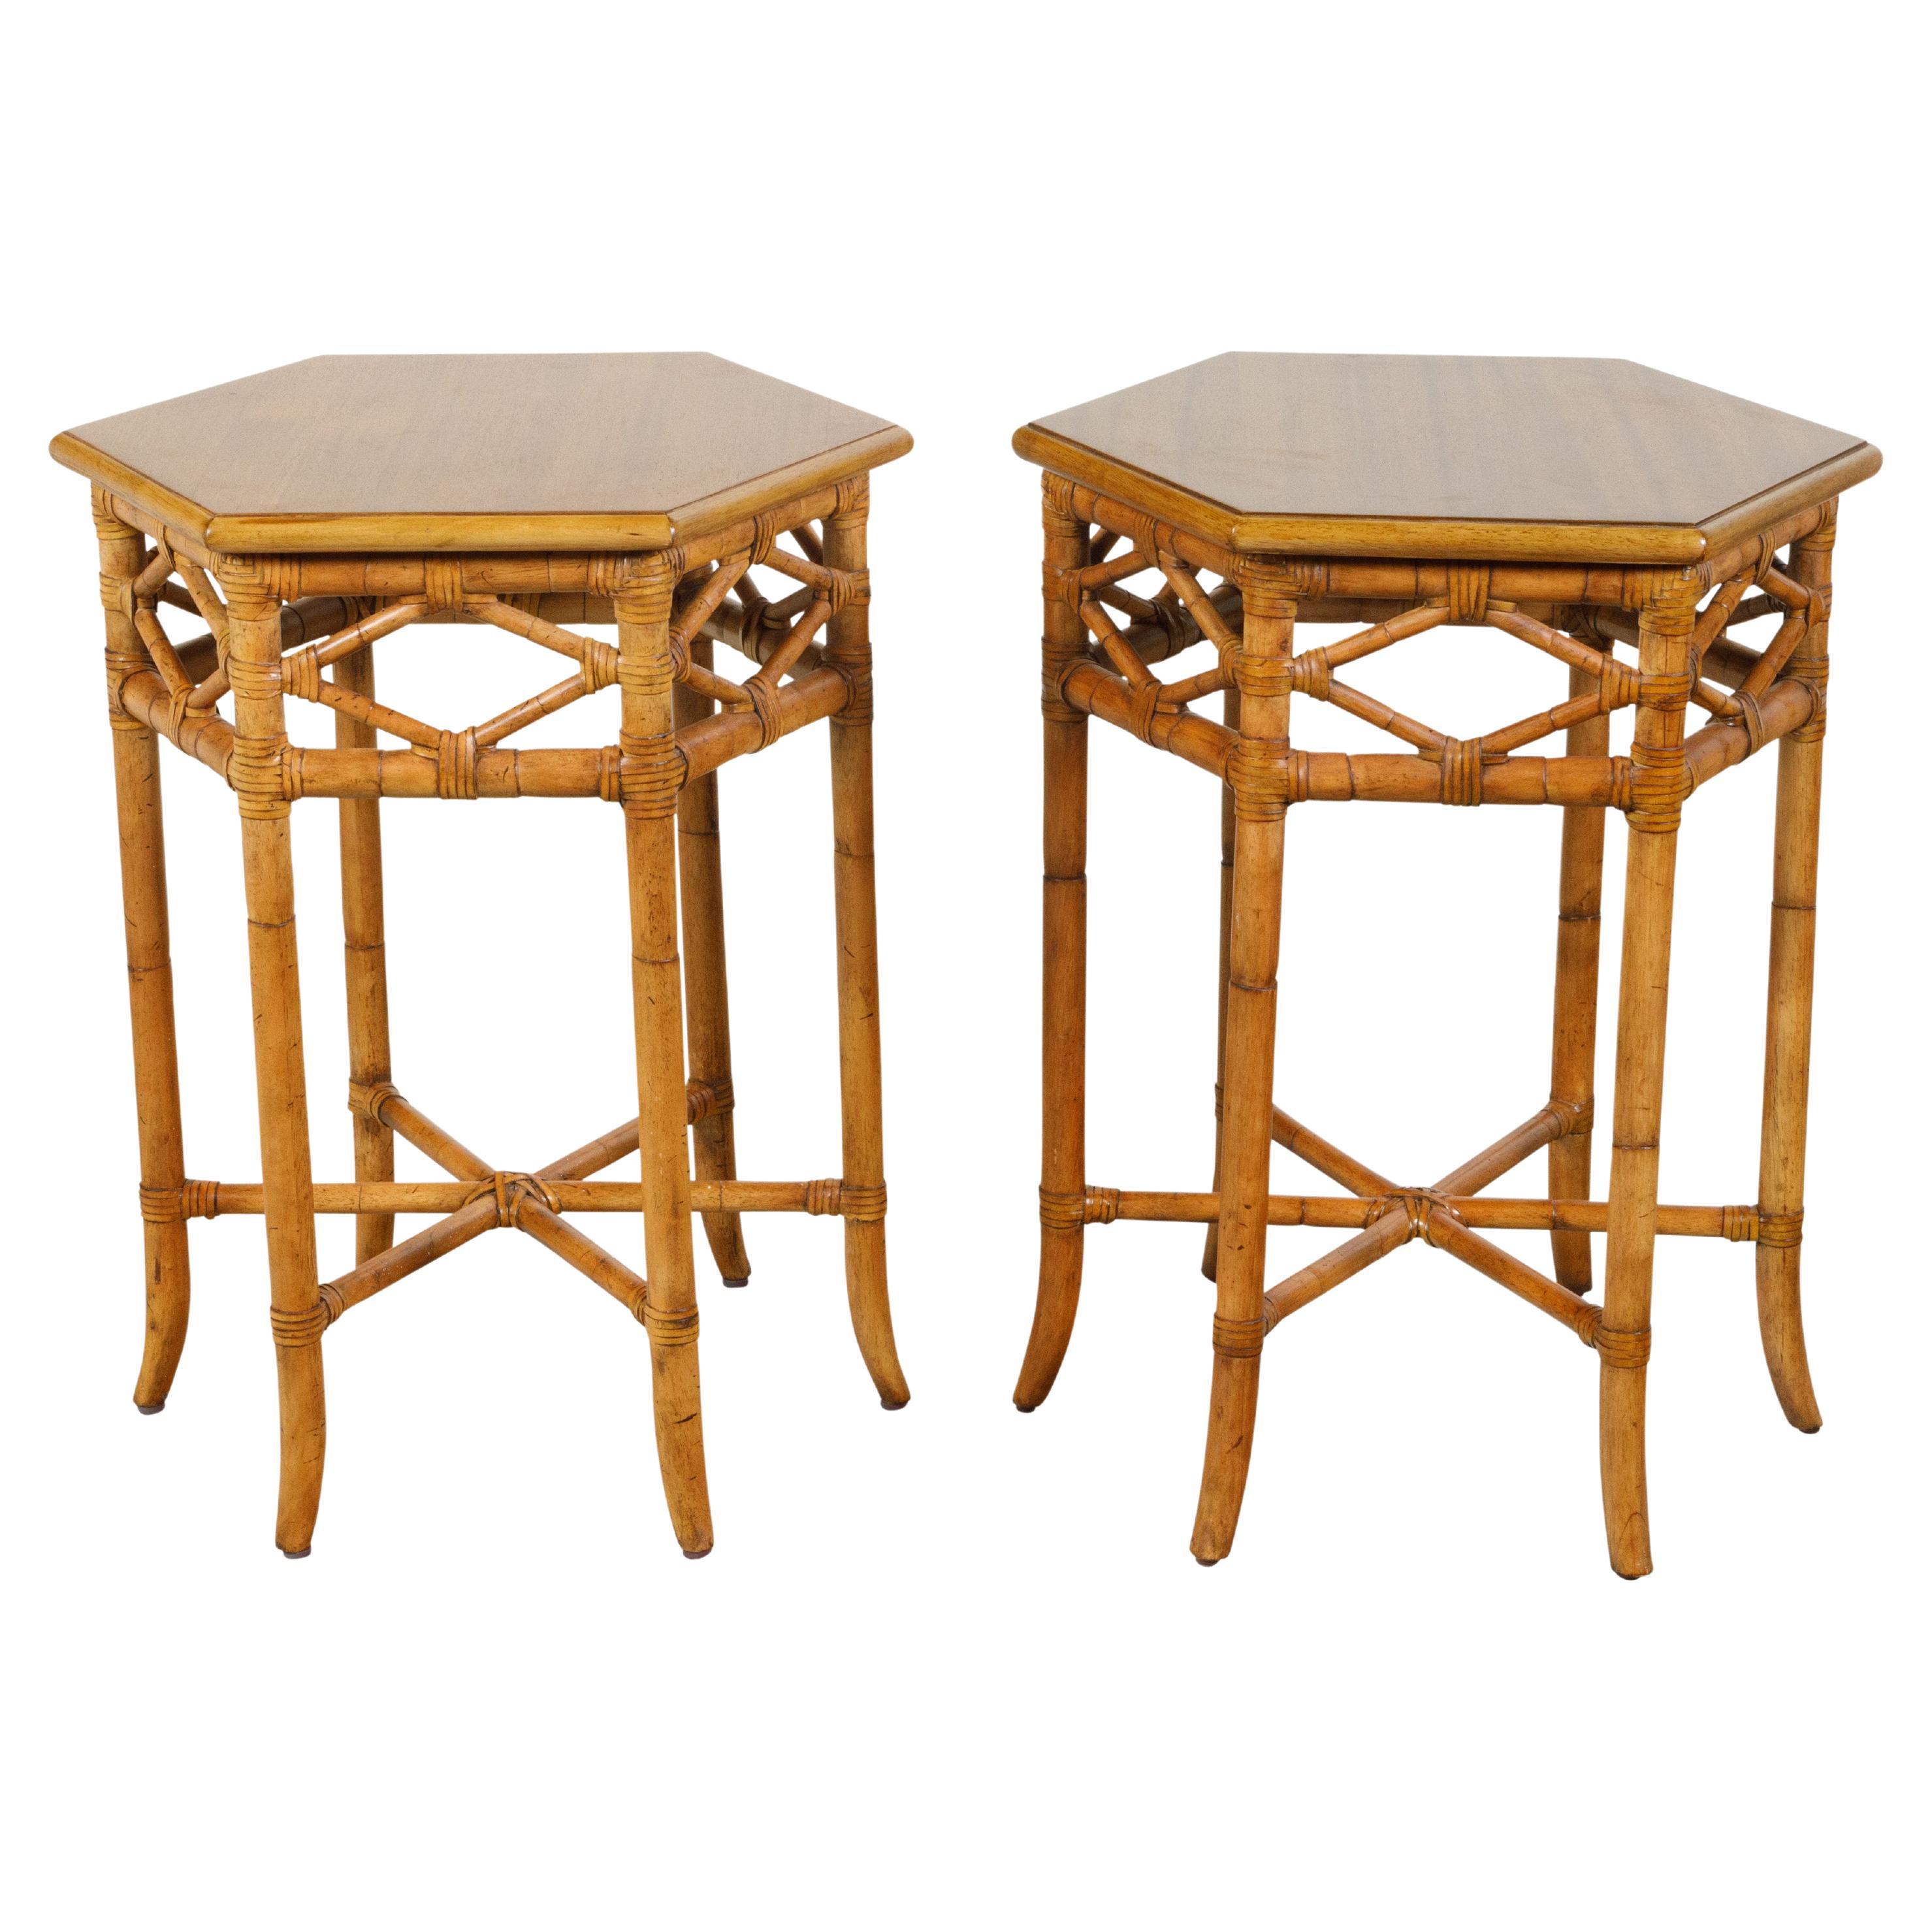 Pair of English Chinoiserie Style Faux Bamboo Side Tables with Hexagonal Tops